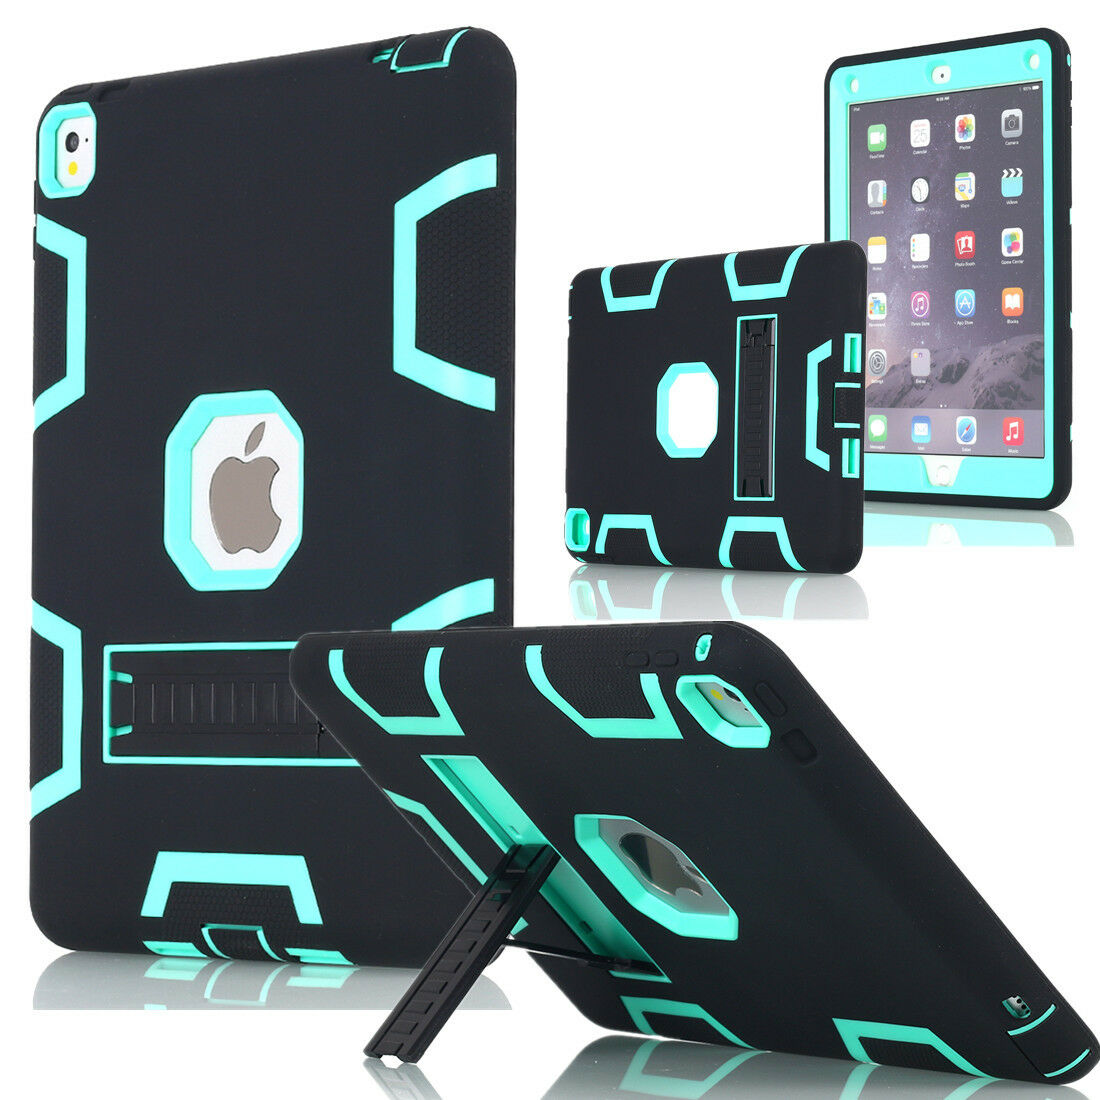 Heavy Duty Hybrid Shockproof Hard Case Cover Rubber Stand For iPad Pro 12.9